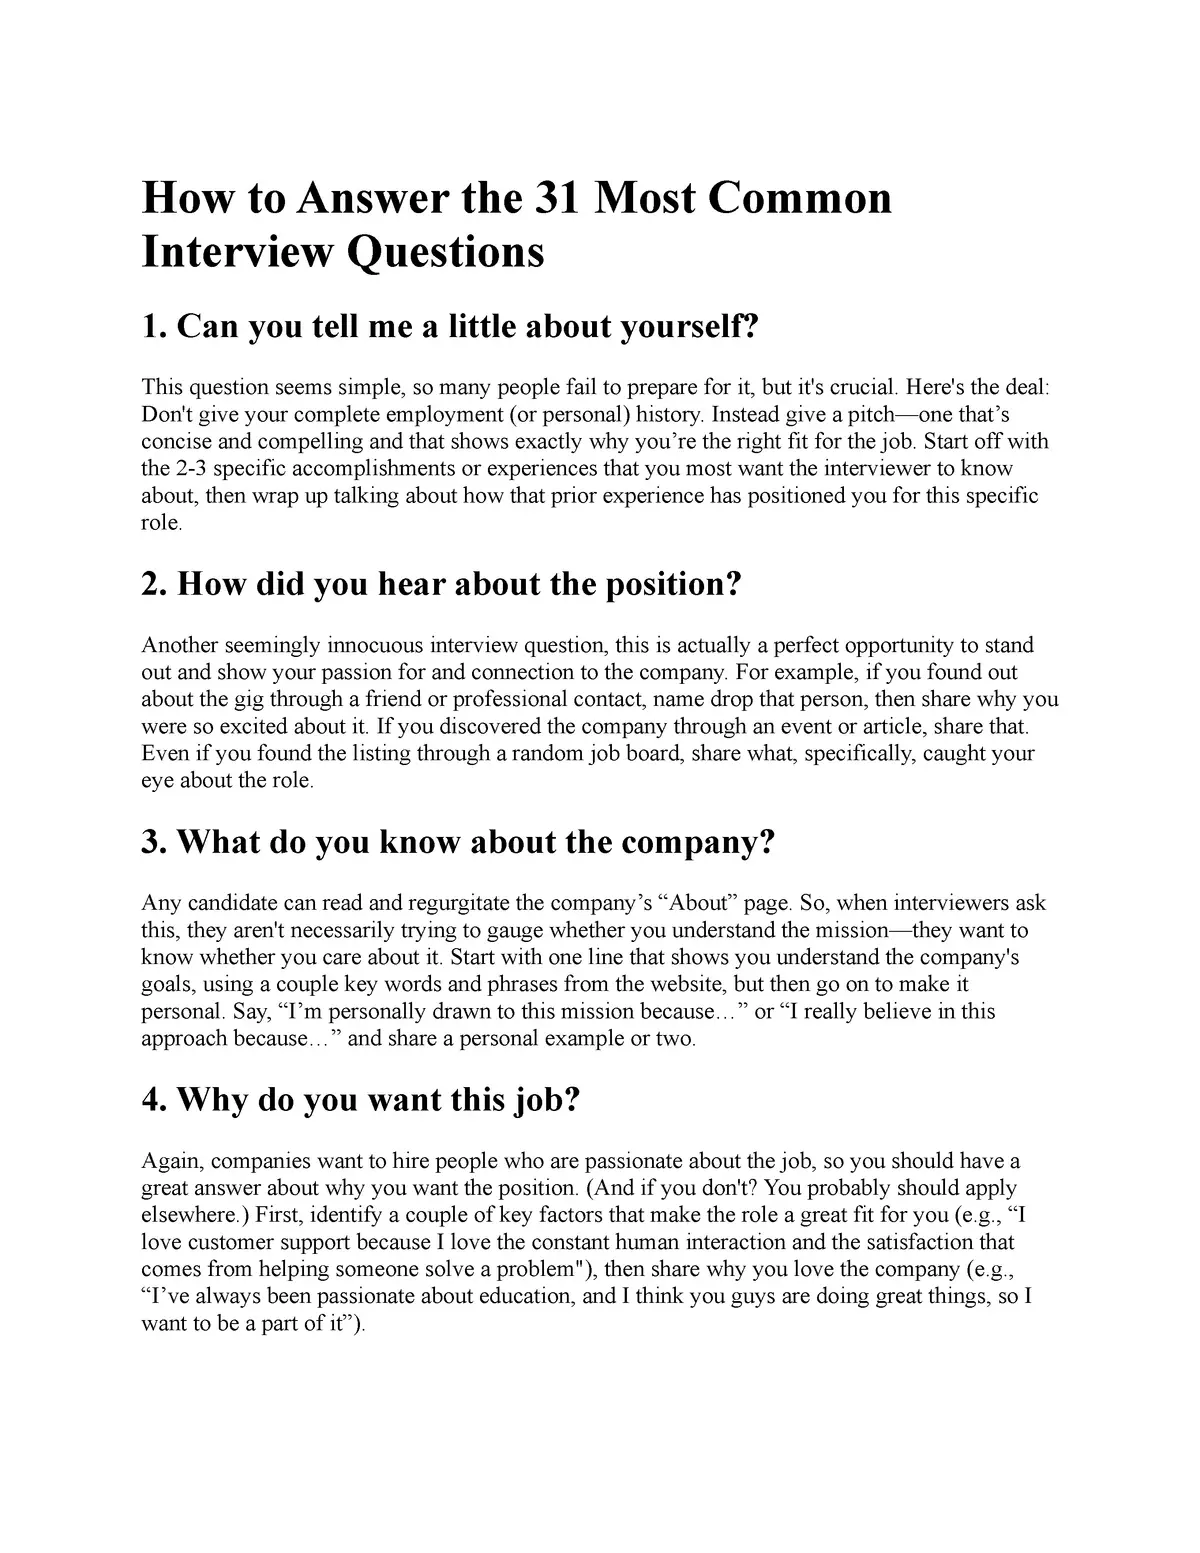 How to Answer the 31 Most Common Interview Questions